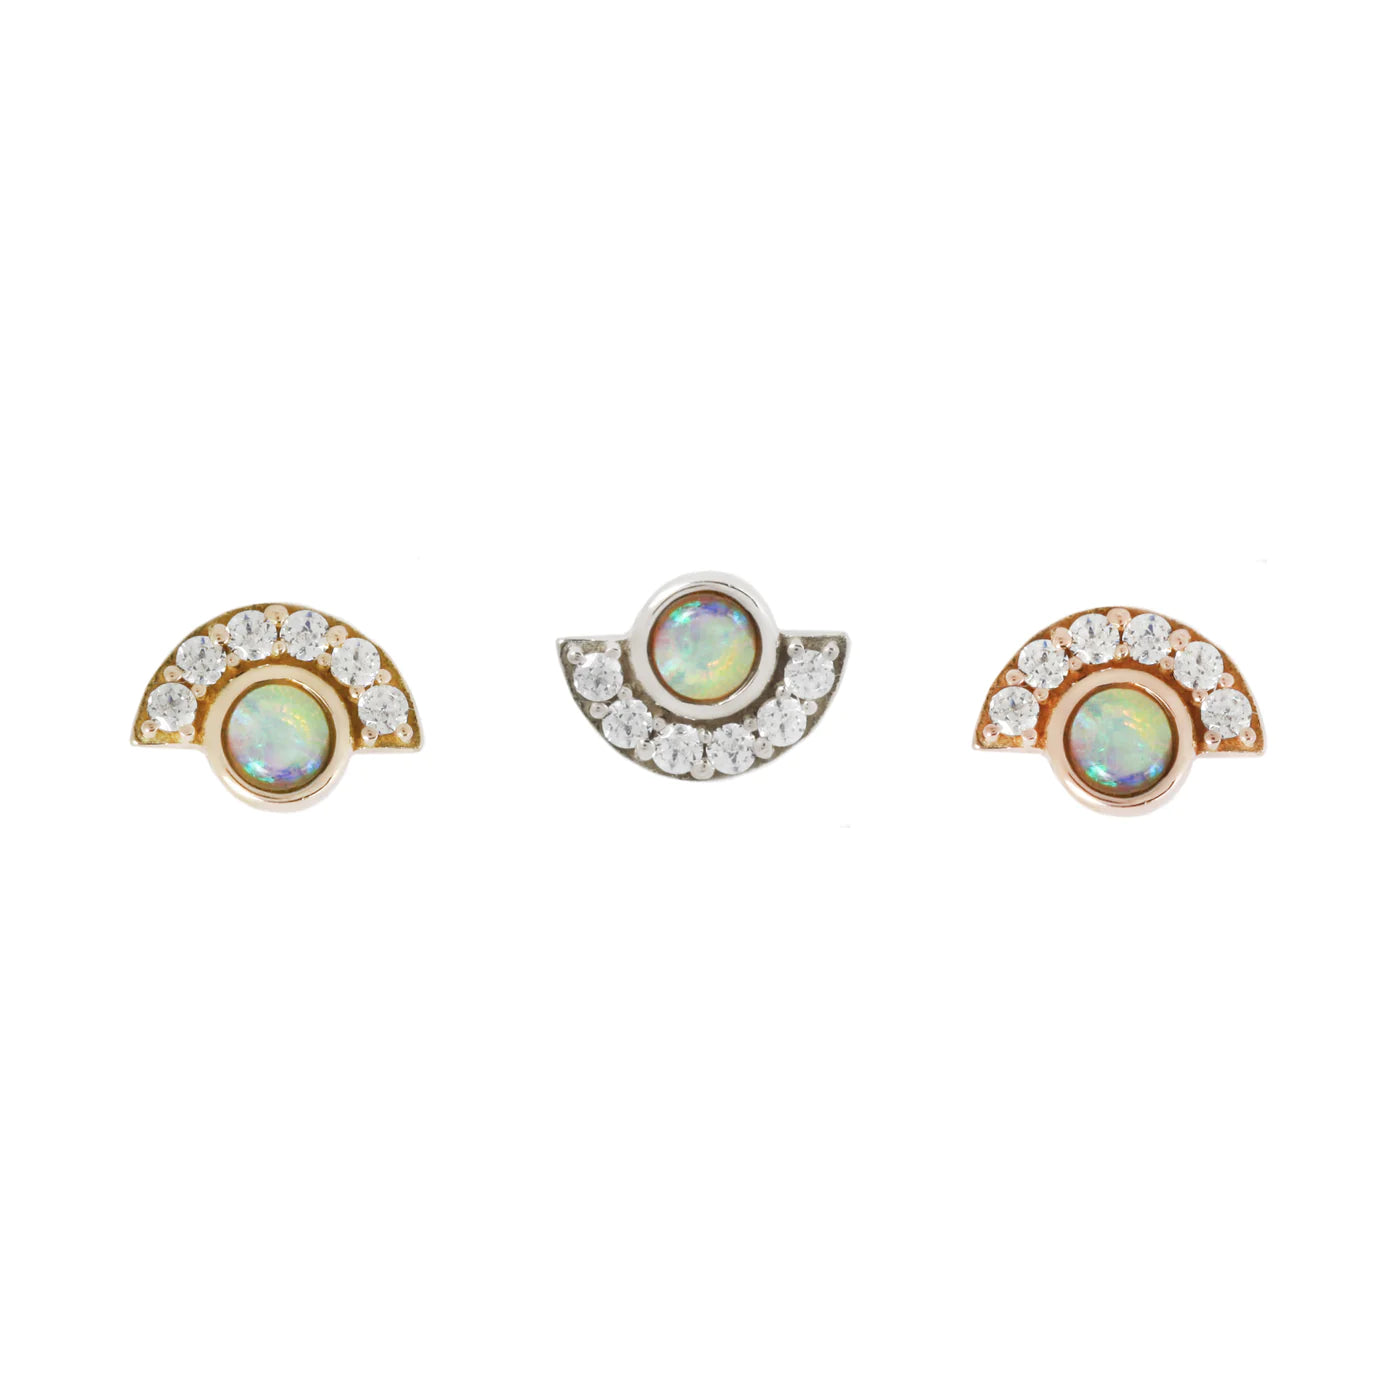 BUDDHA JEWELRY - KAHLO - OPAL +CZ - 14KT SOLID GOLD - THREADLESS END